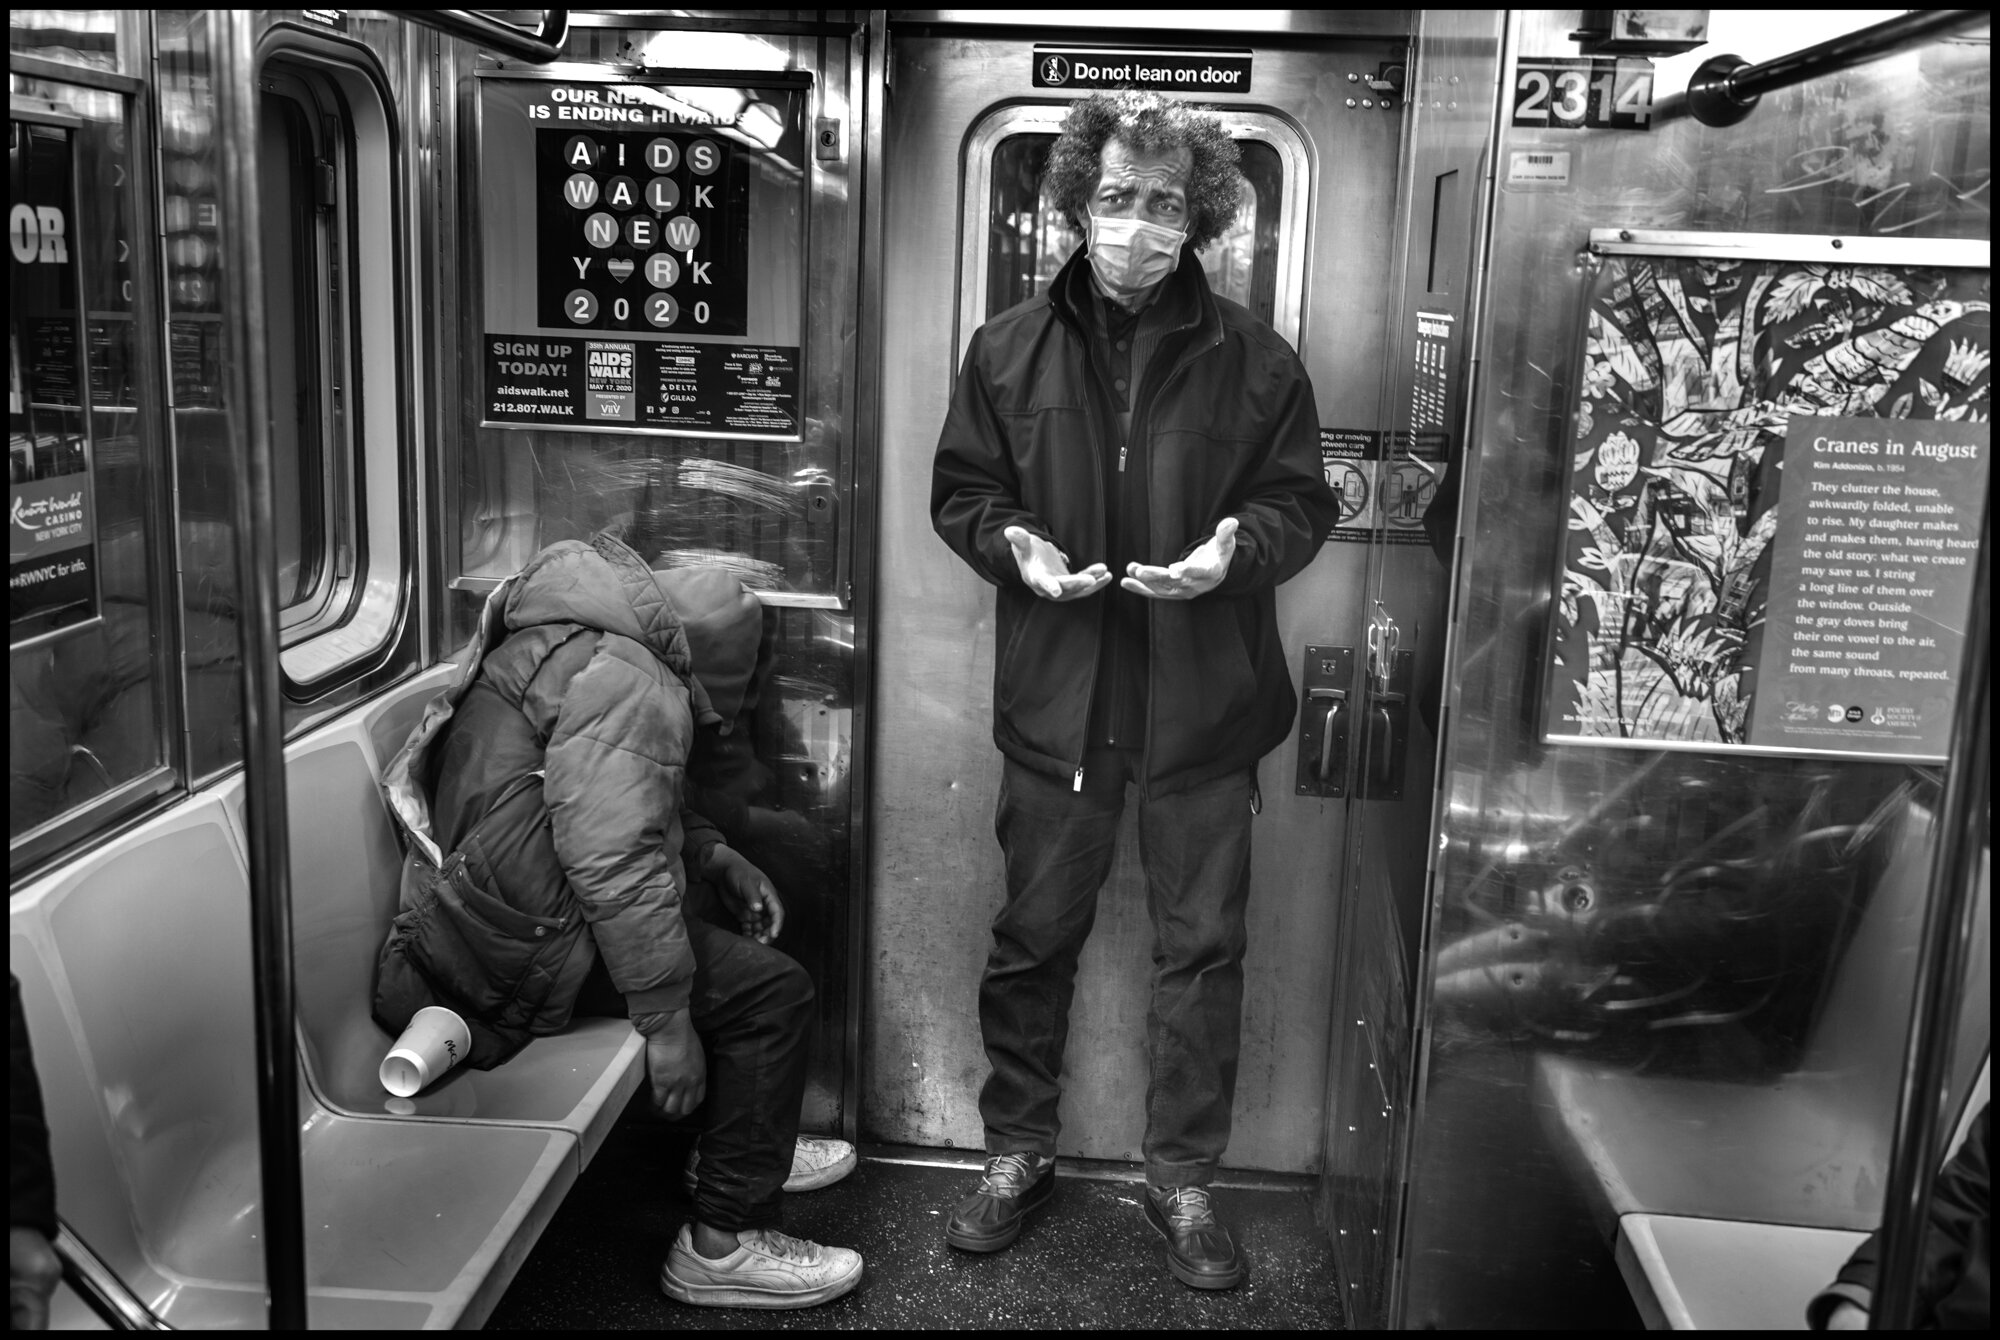  Harry, 63, stands at the back of a subway car next to a homeless man that has taken shelter in the train. I ask him what he does in life and he replied, “I just try to help out.”   March 26, 2020 ©Peter Turnley.   ID# 04-007 